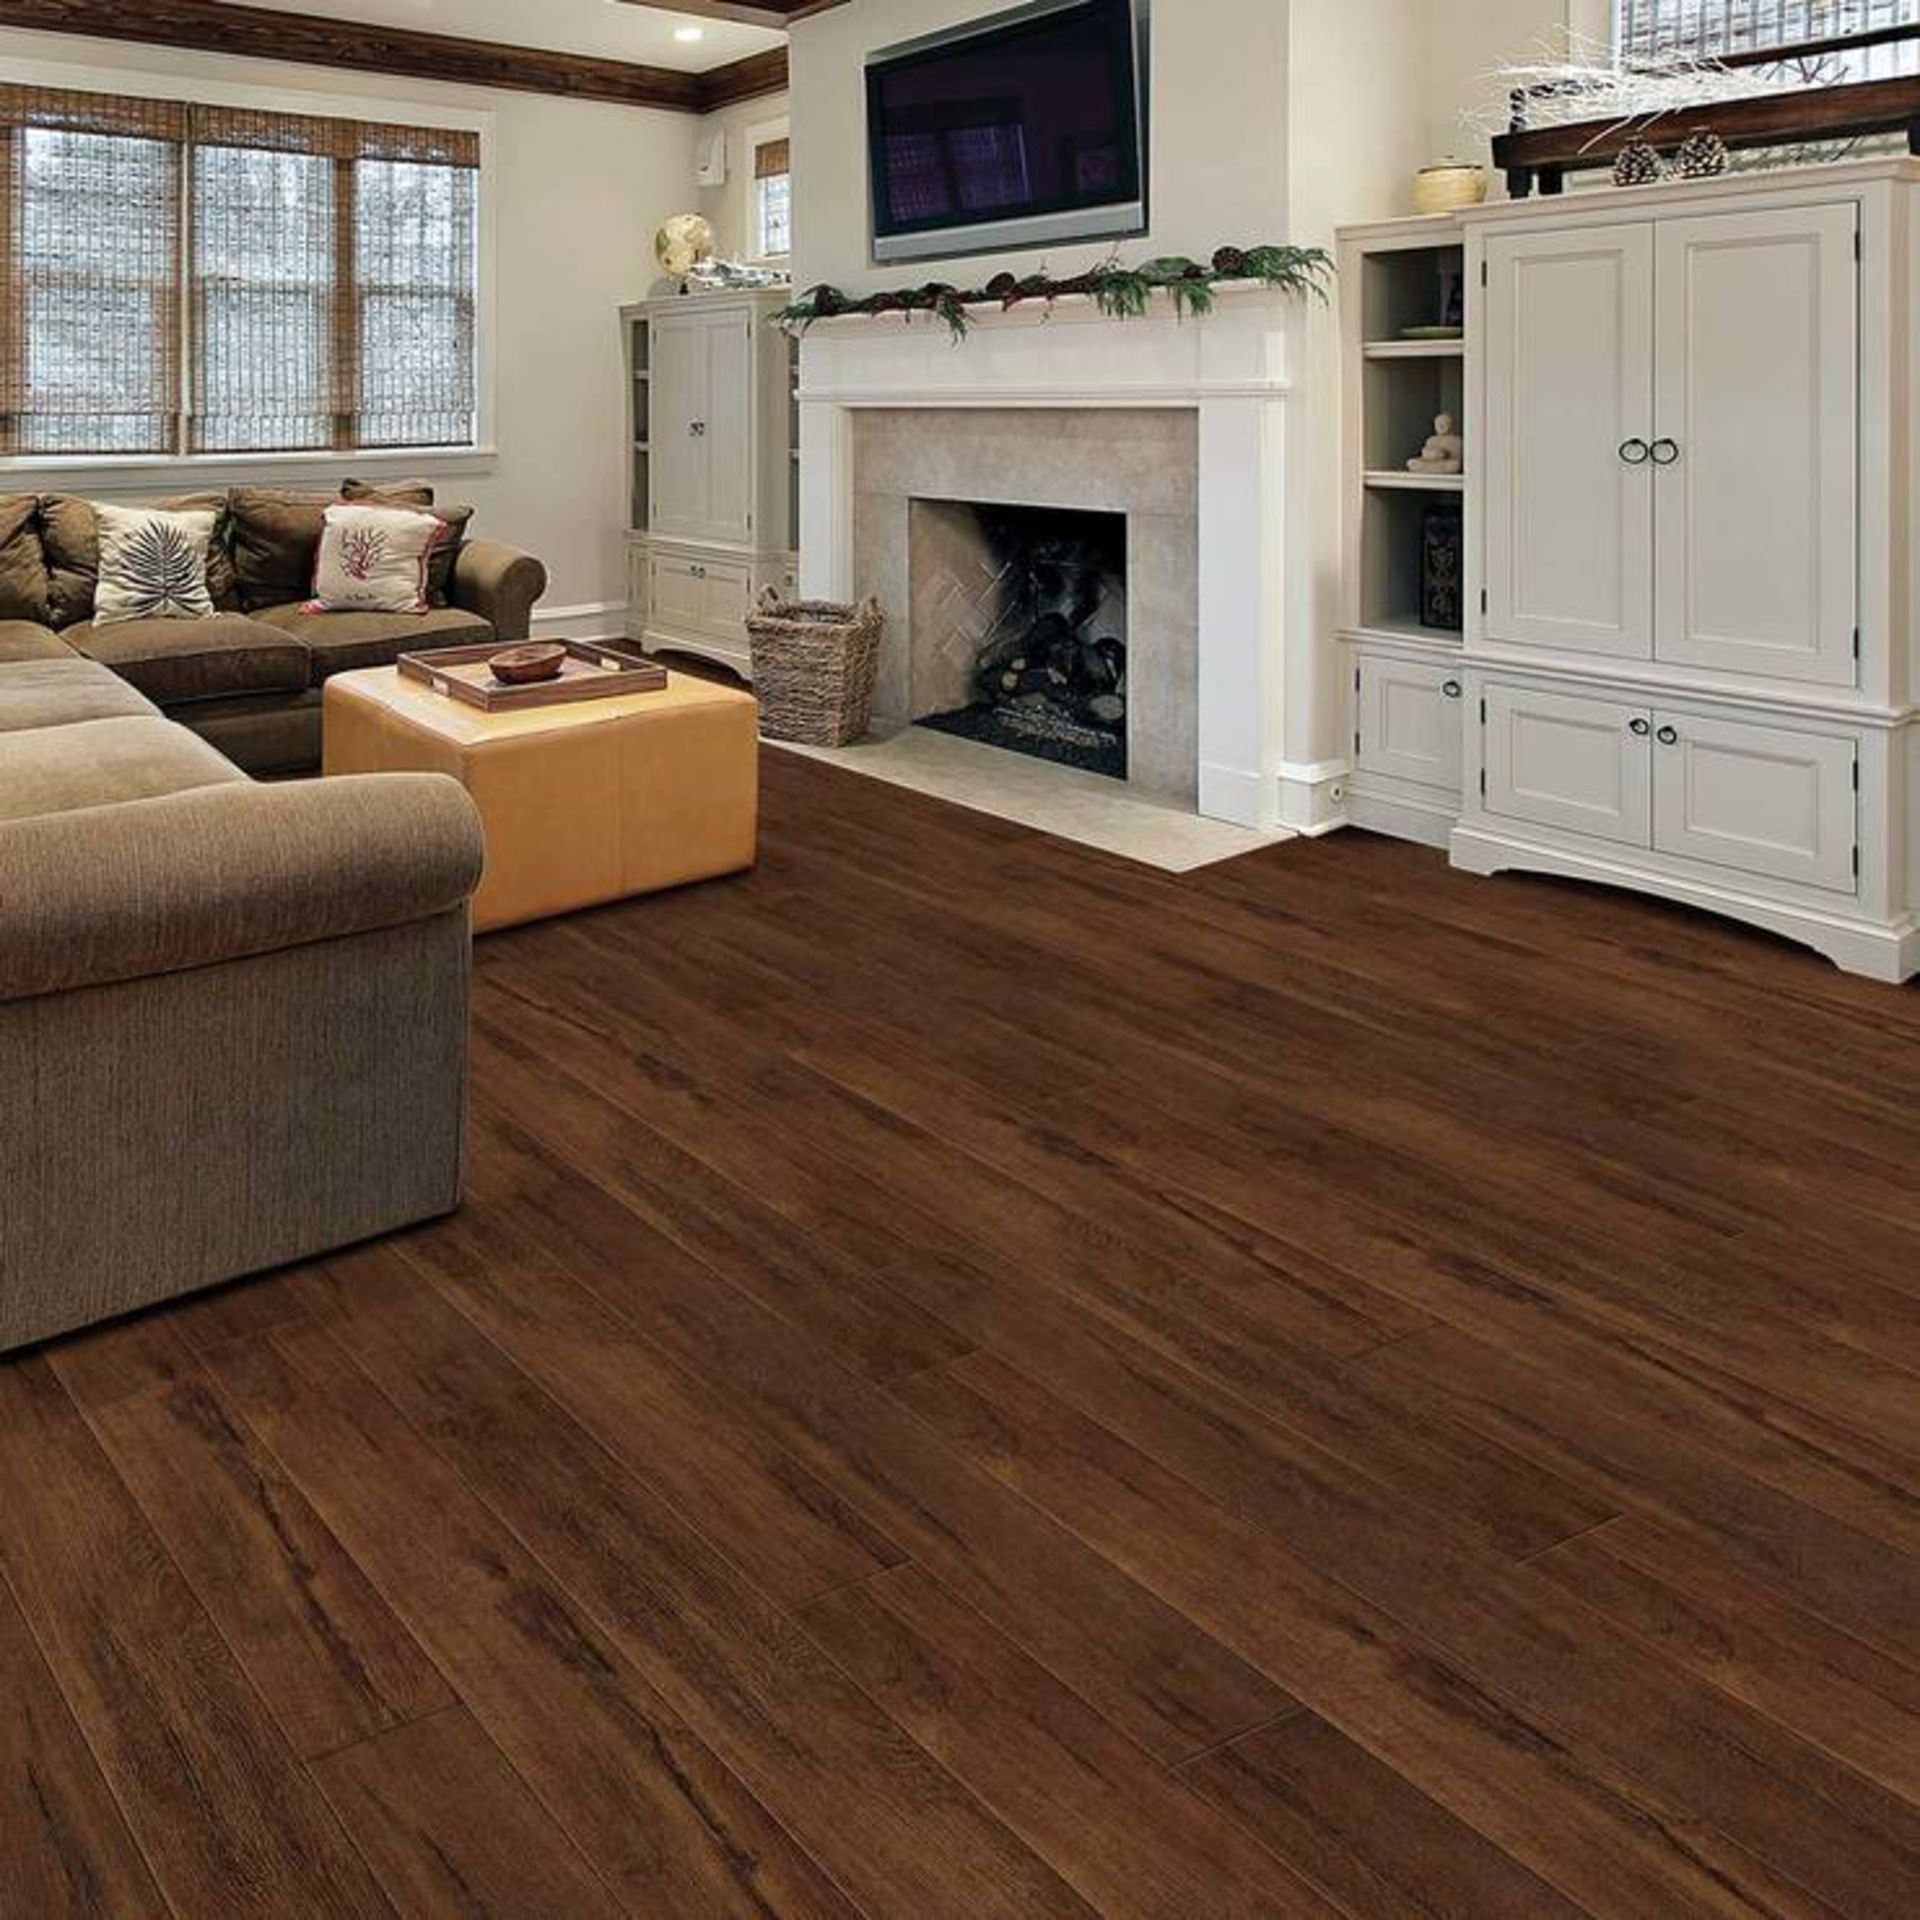 1 BOXED GOLDEN SELECT LAMINATE FLOORING IN HIGHLAND BROWN OAK (COVERS APPROXIMATELY 1.162m2 PER BOX)